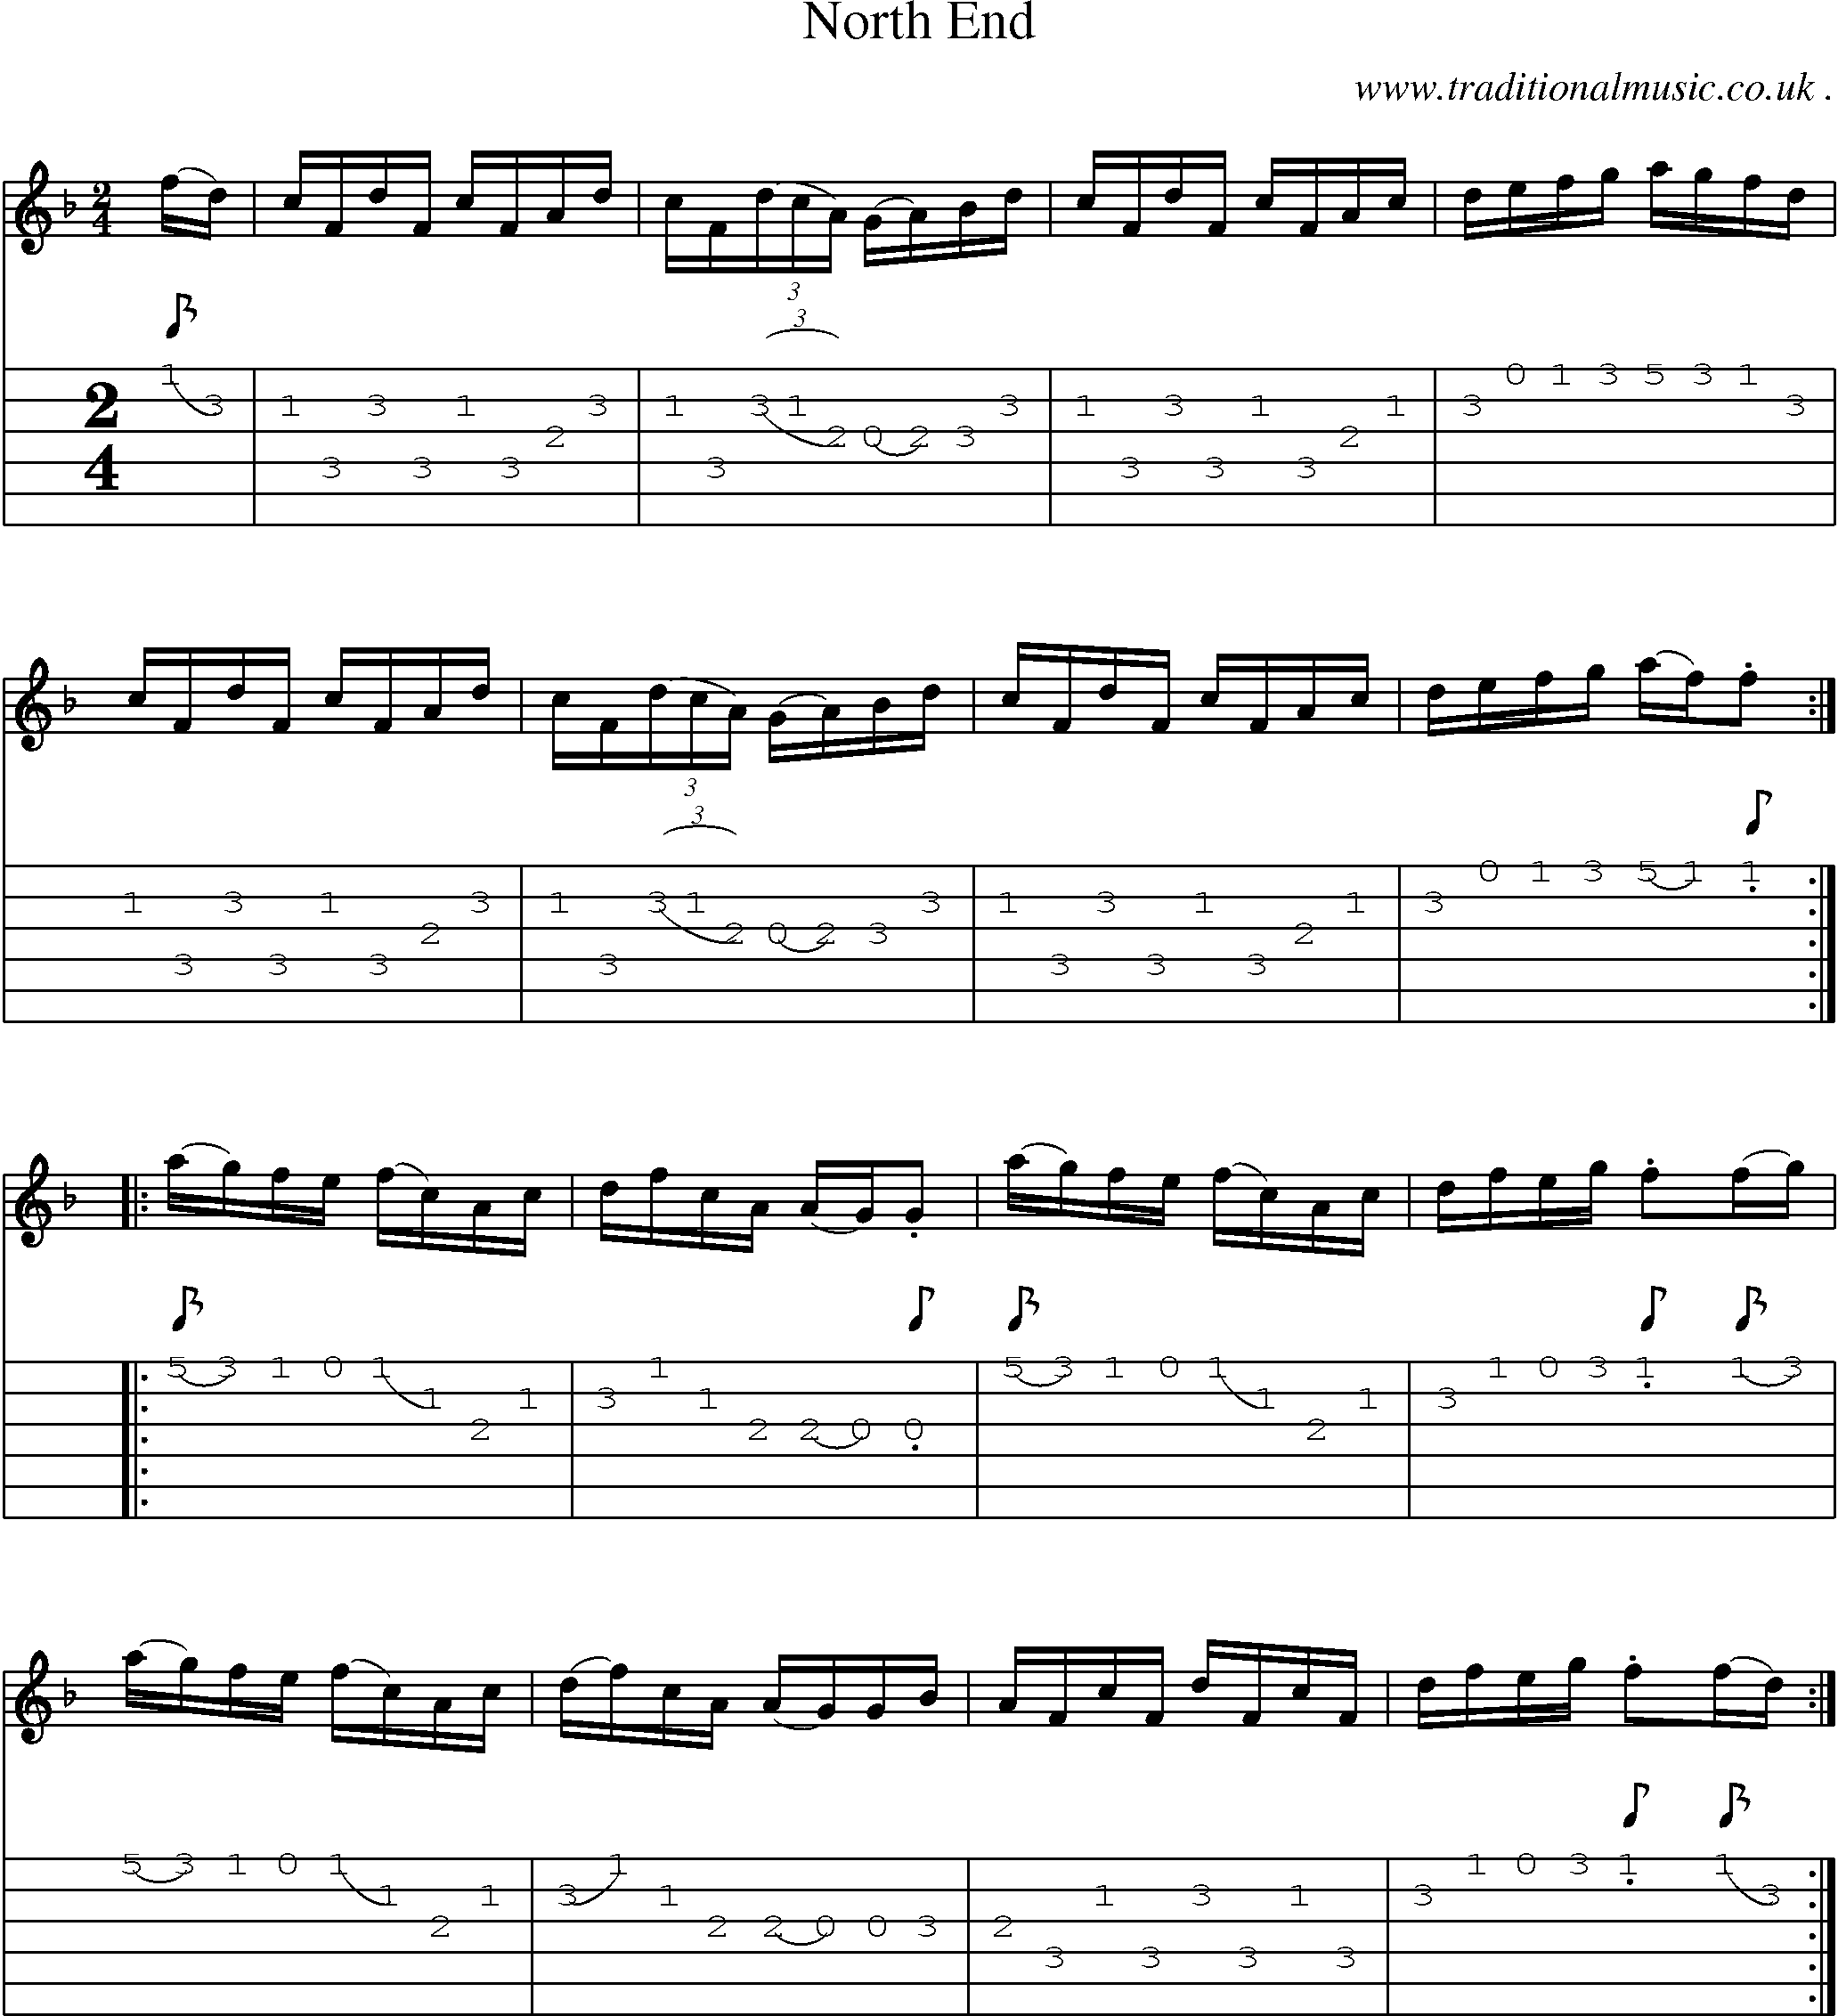 Sheet-Music and Guitar Tabs for North End